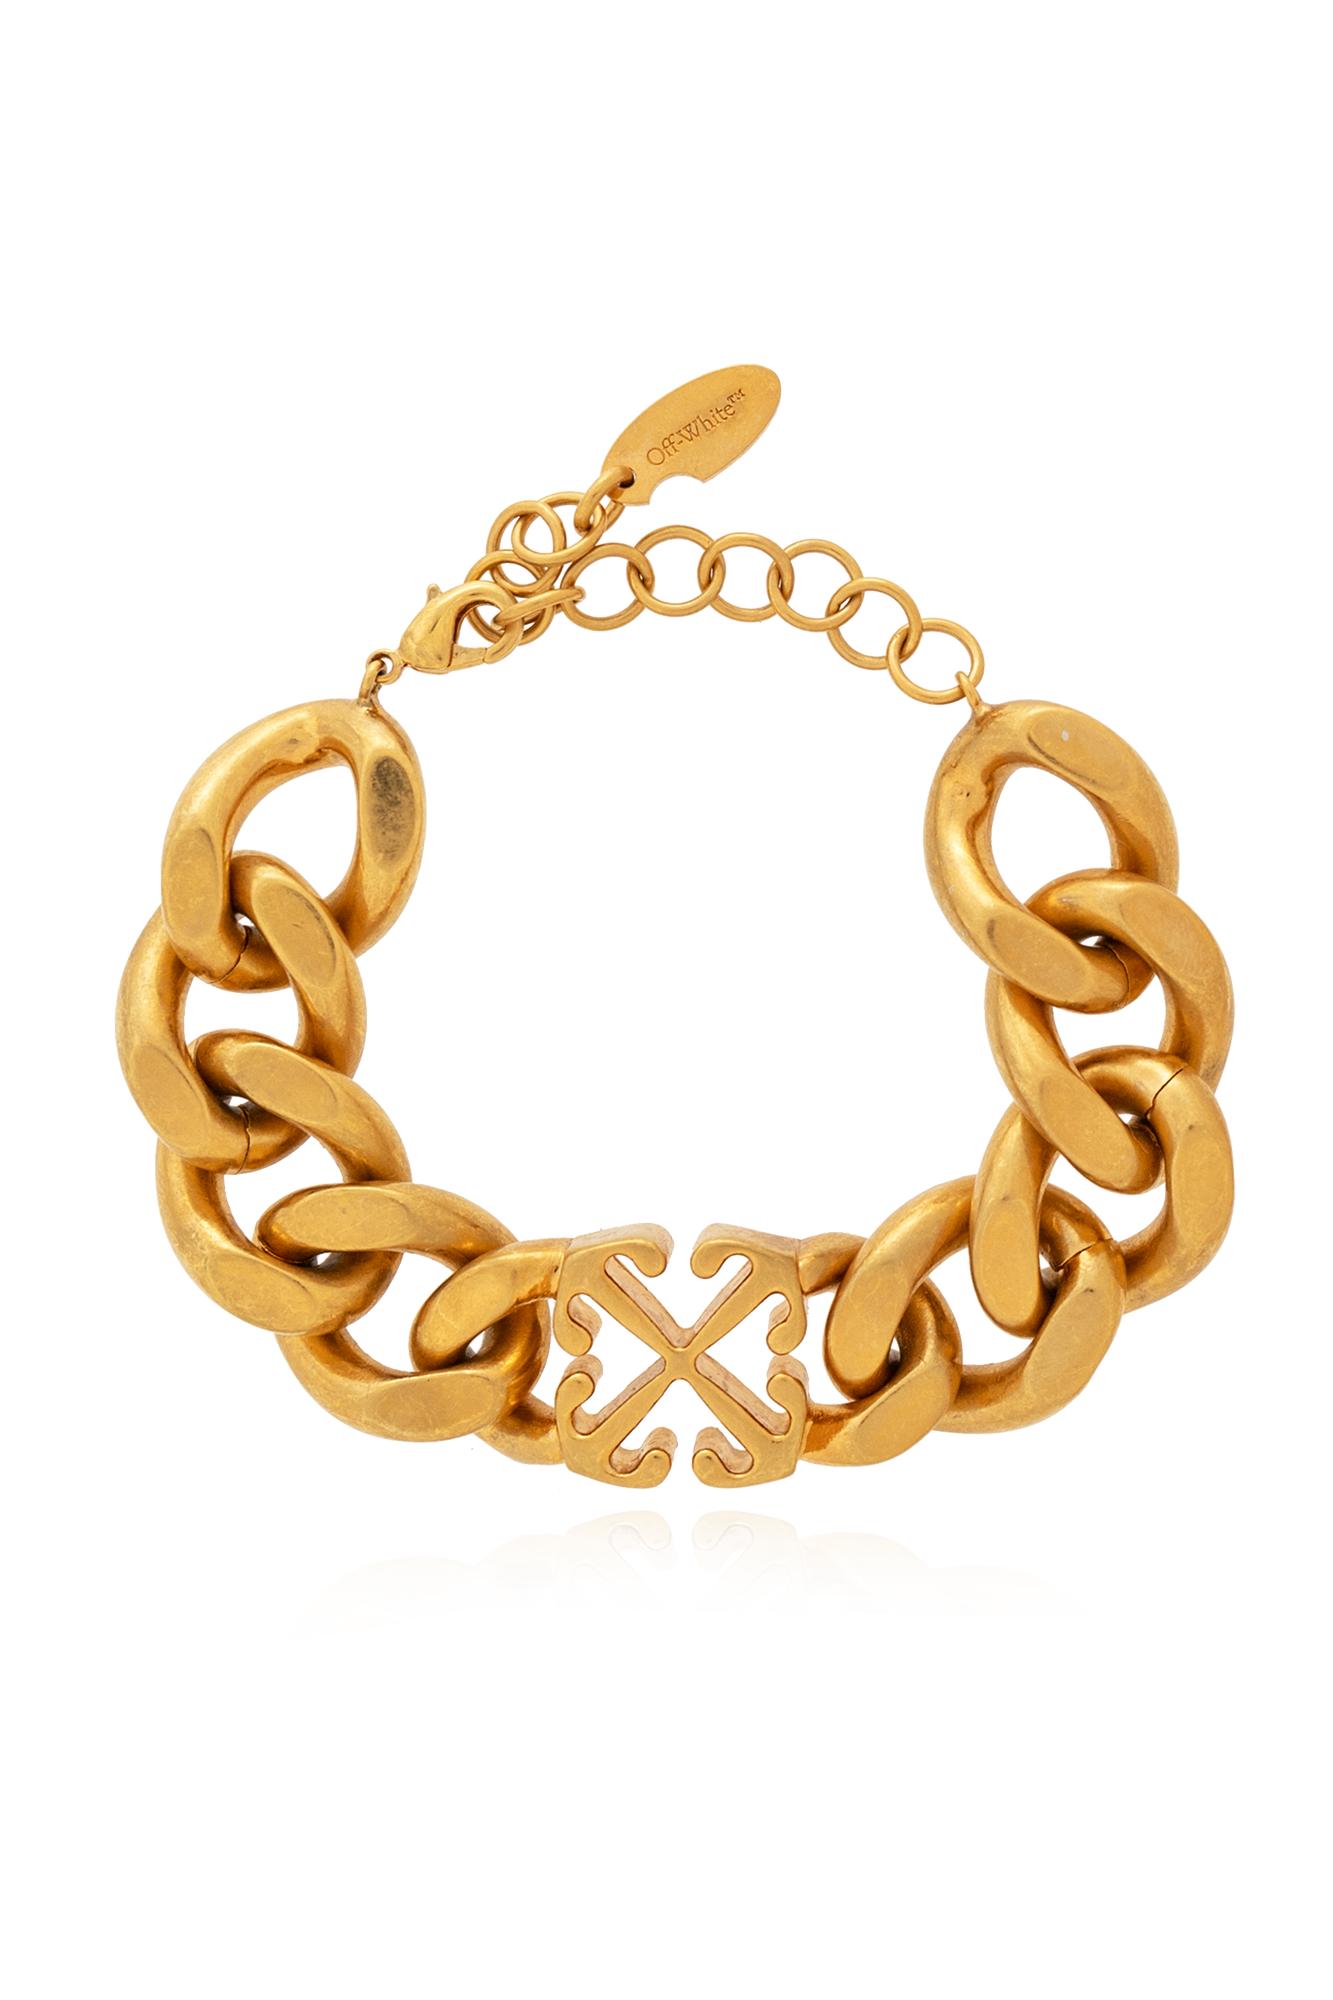 Buy Piah Gold Plated Brass 1 Line Styles bracelet for Mens-8123 at Amazon.in